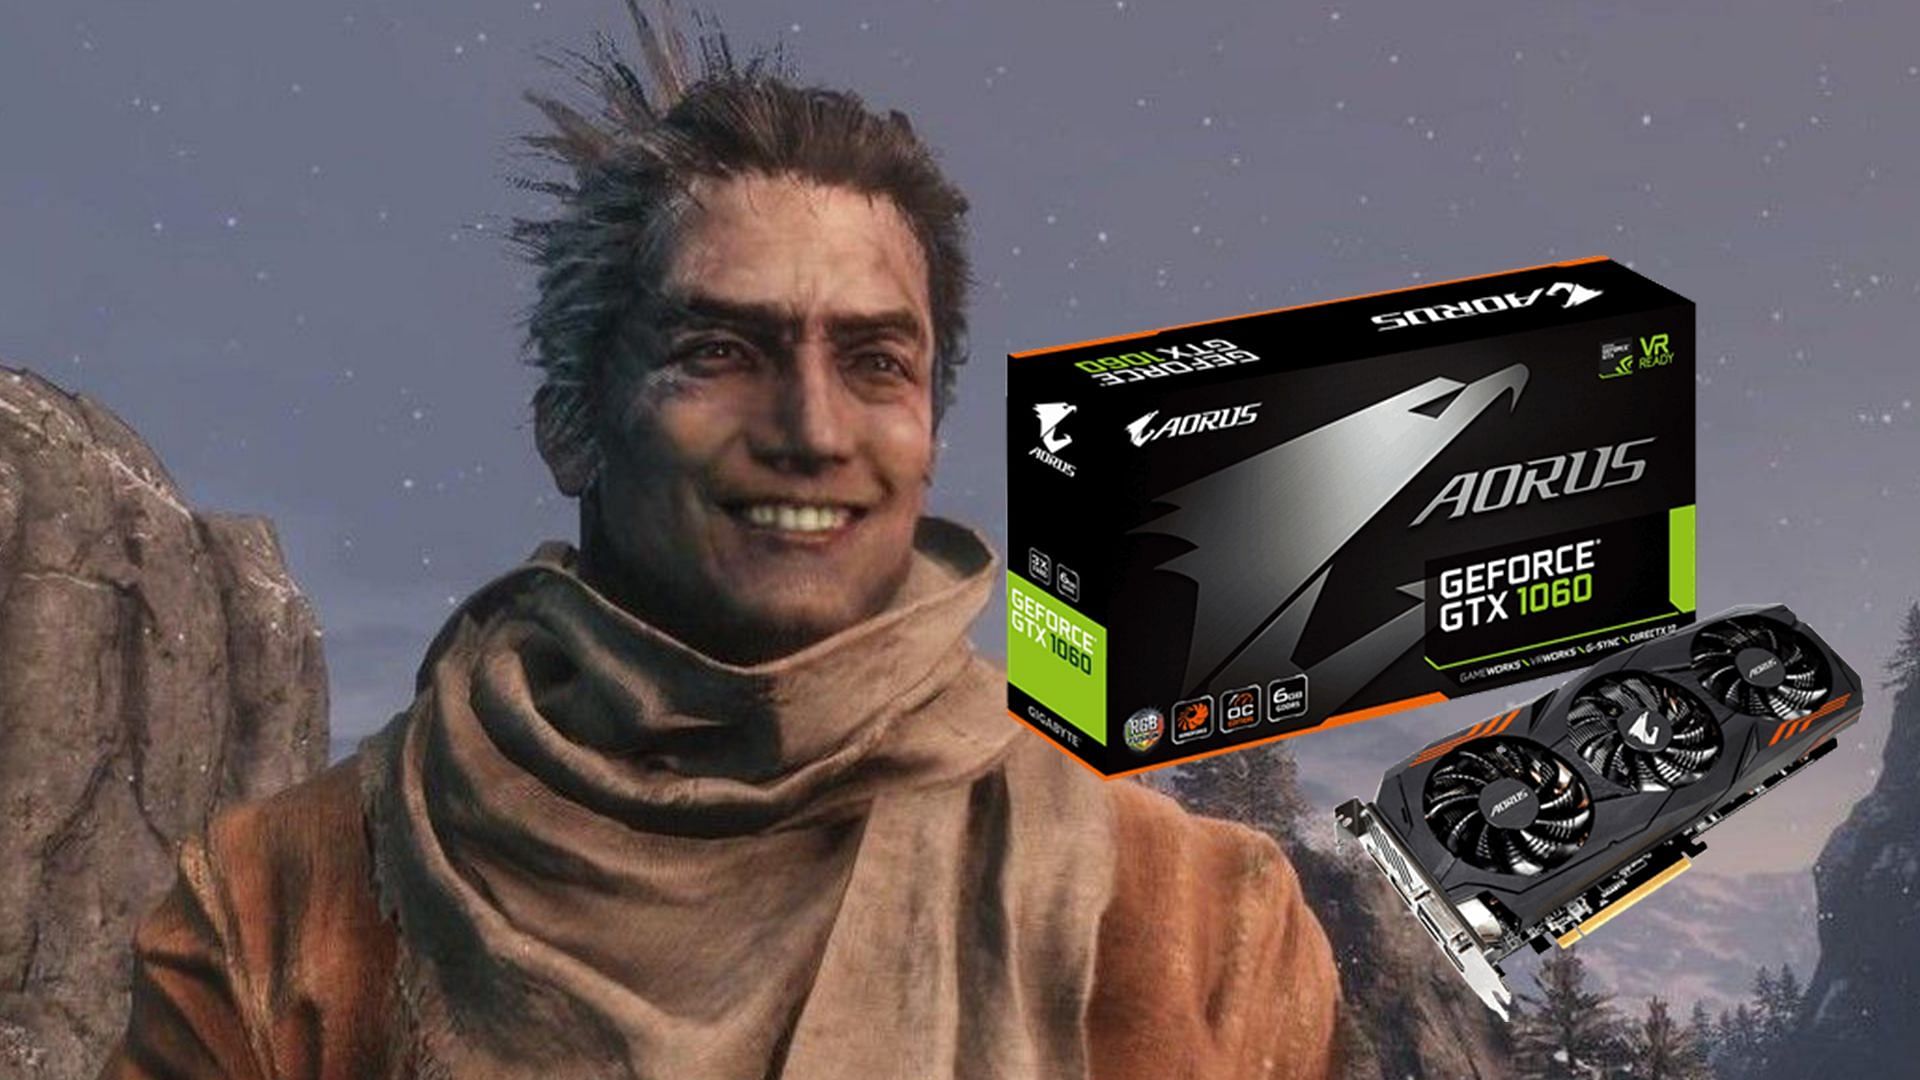 Best games to play on Gtx 1060